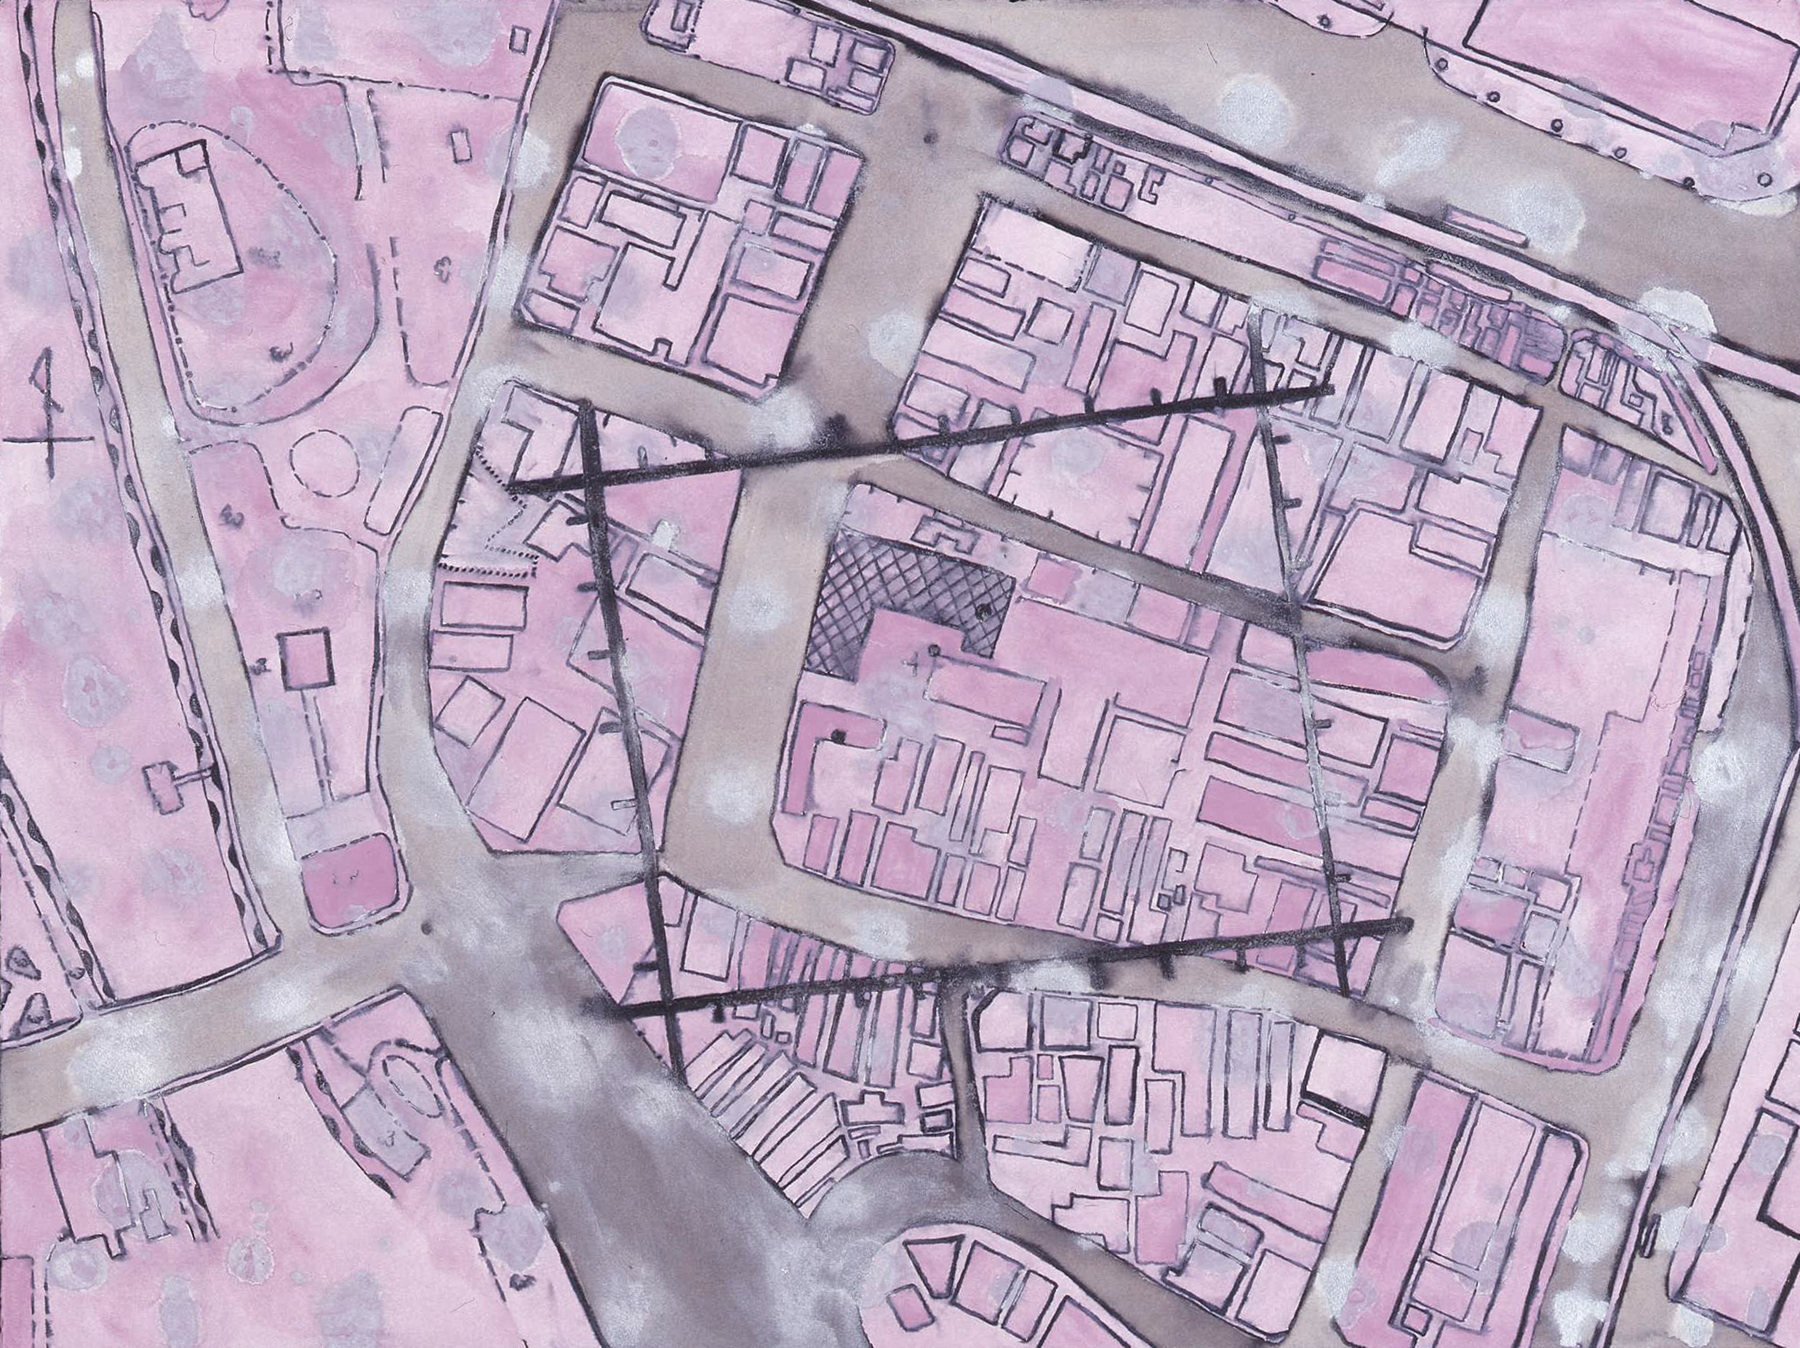 Hypocenter in Hiroshima, Japan, 1945, from the series Bomb After Bomb: A Violent Cartography, 22"x30", ink, gouache, watercolor on paper, elin o'Hara slavick